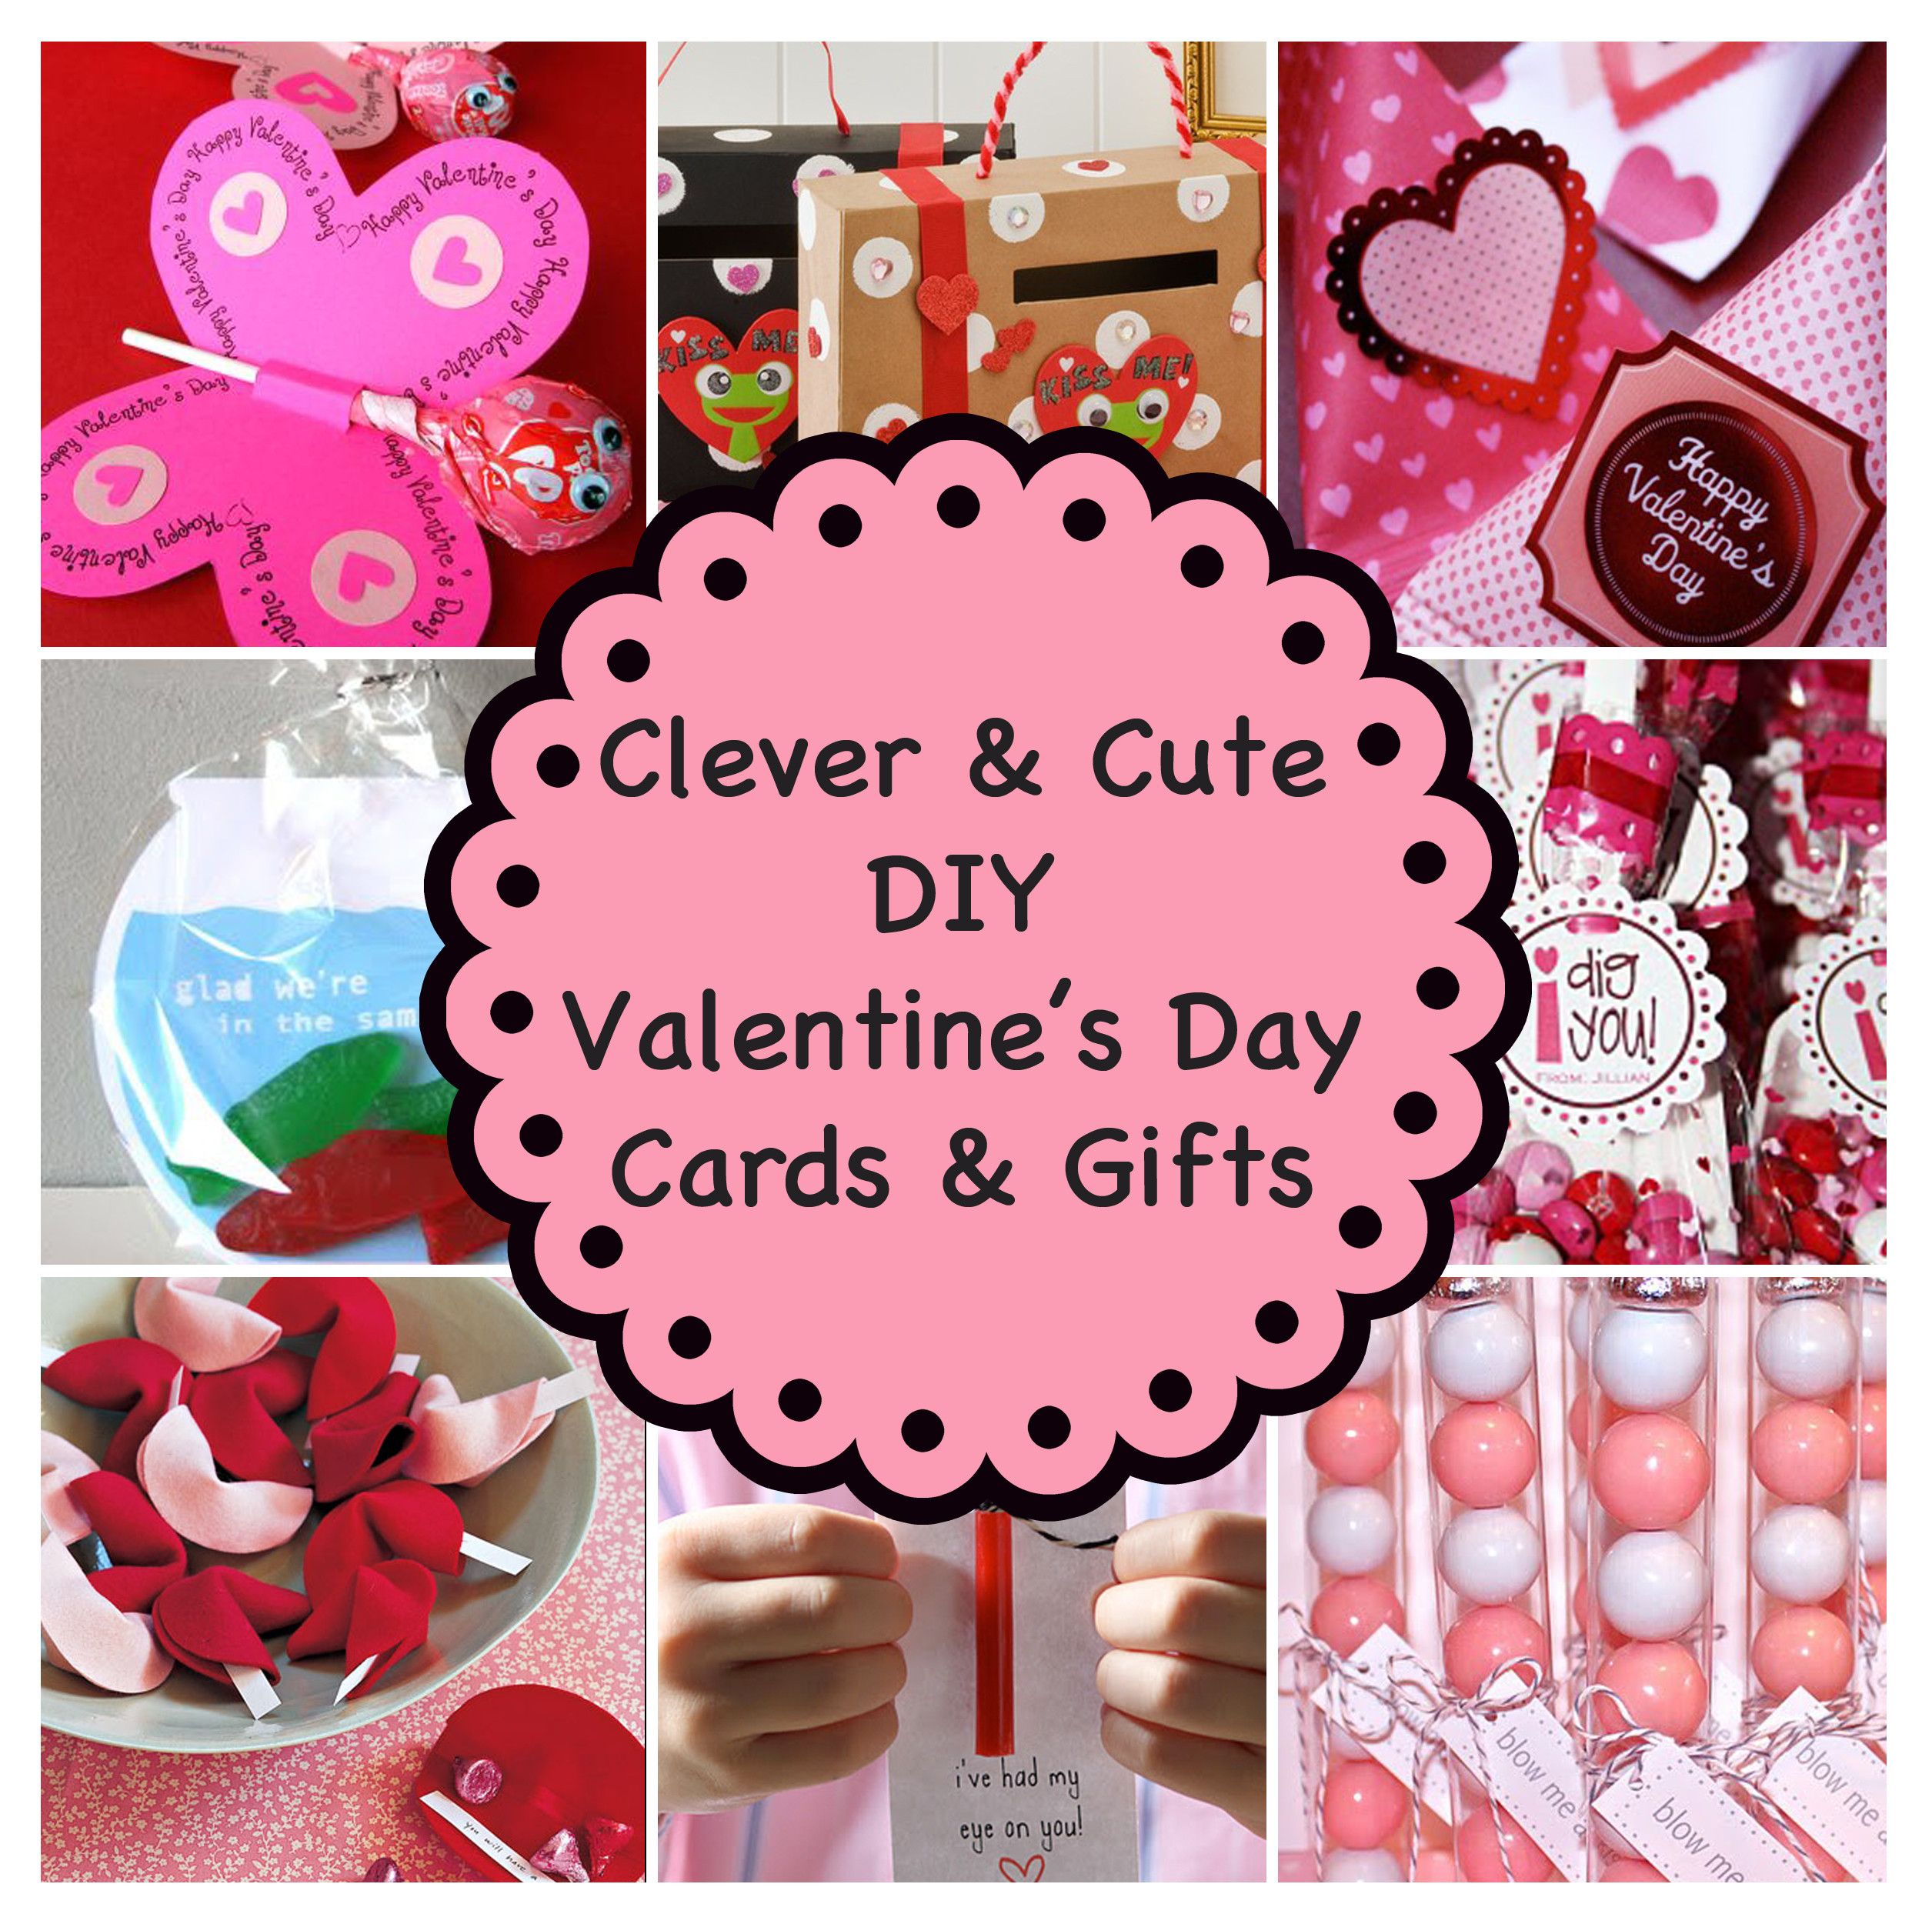 Valentines Day Ideas Gift
 Clever and Cute DIY Valentine’s Day Cards & Gifts